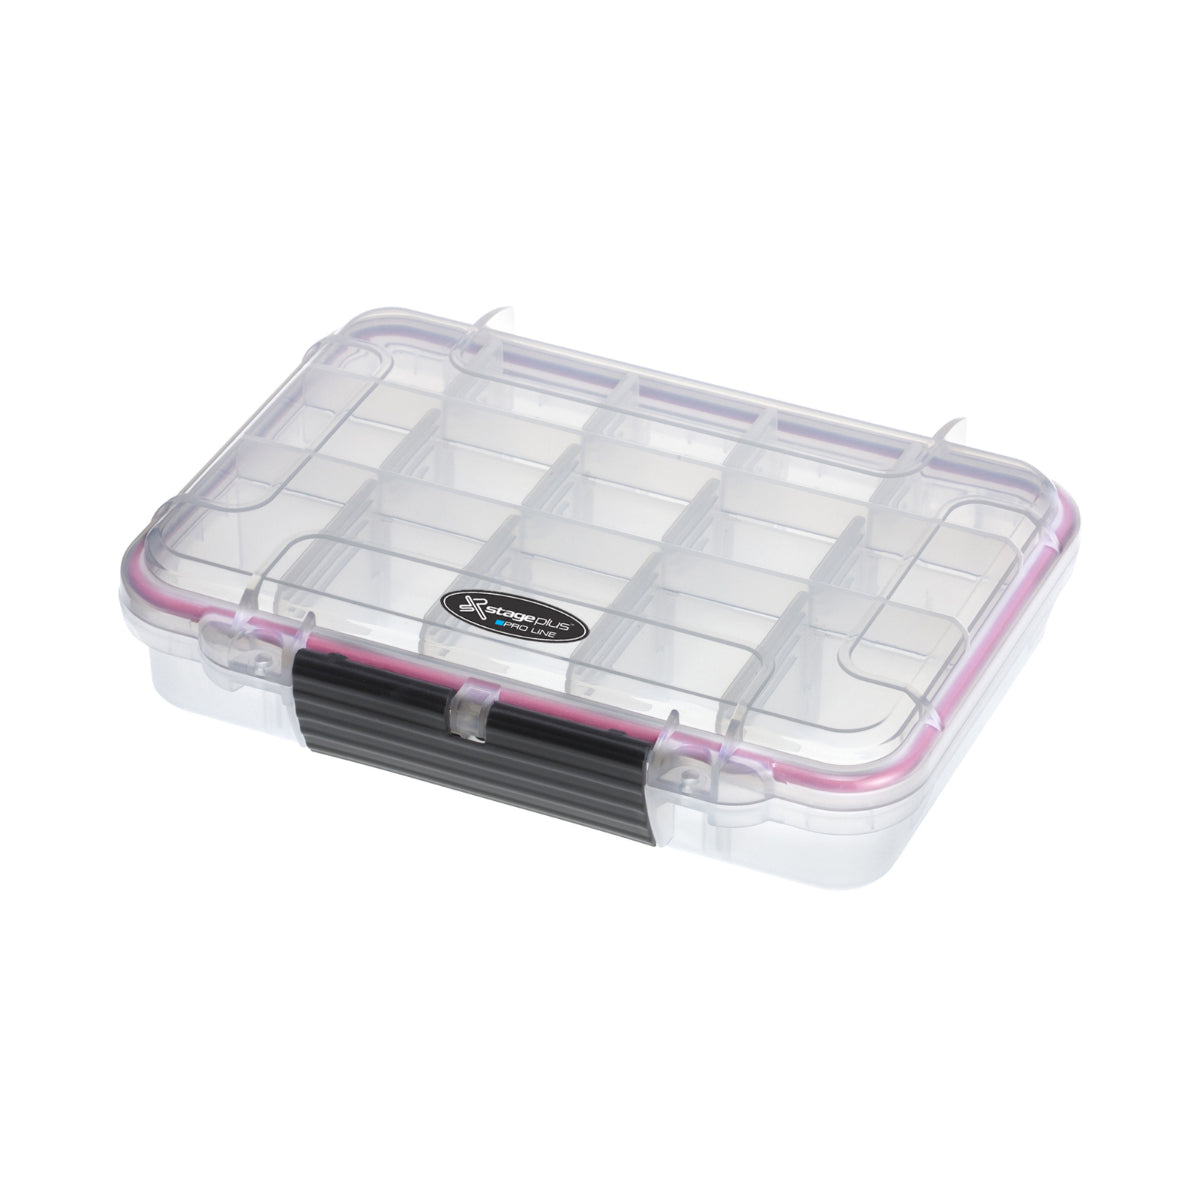 Techprotectus Clear Hardshell Case - RTP-CYCL-K-MP14M1